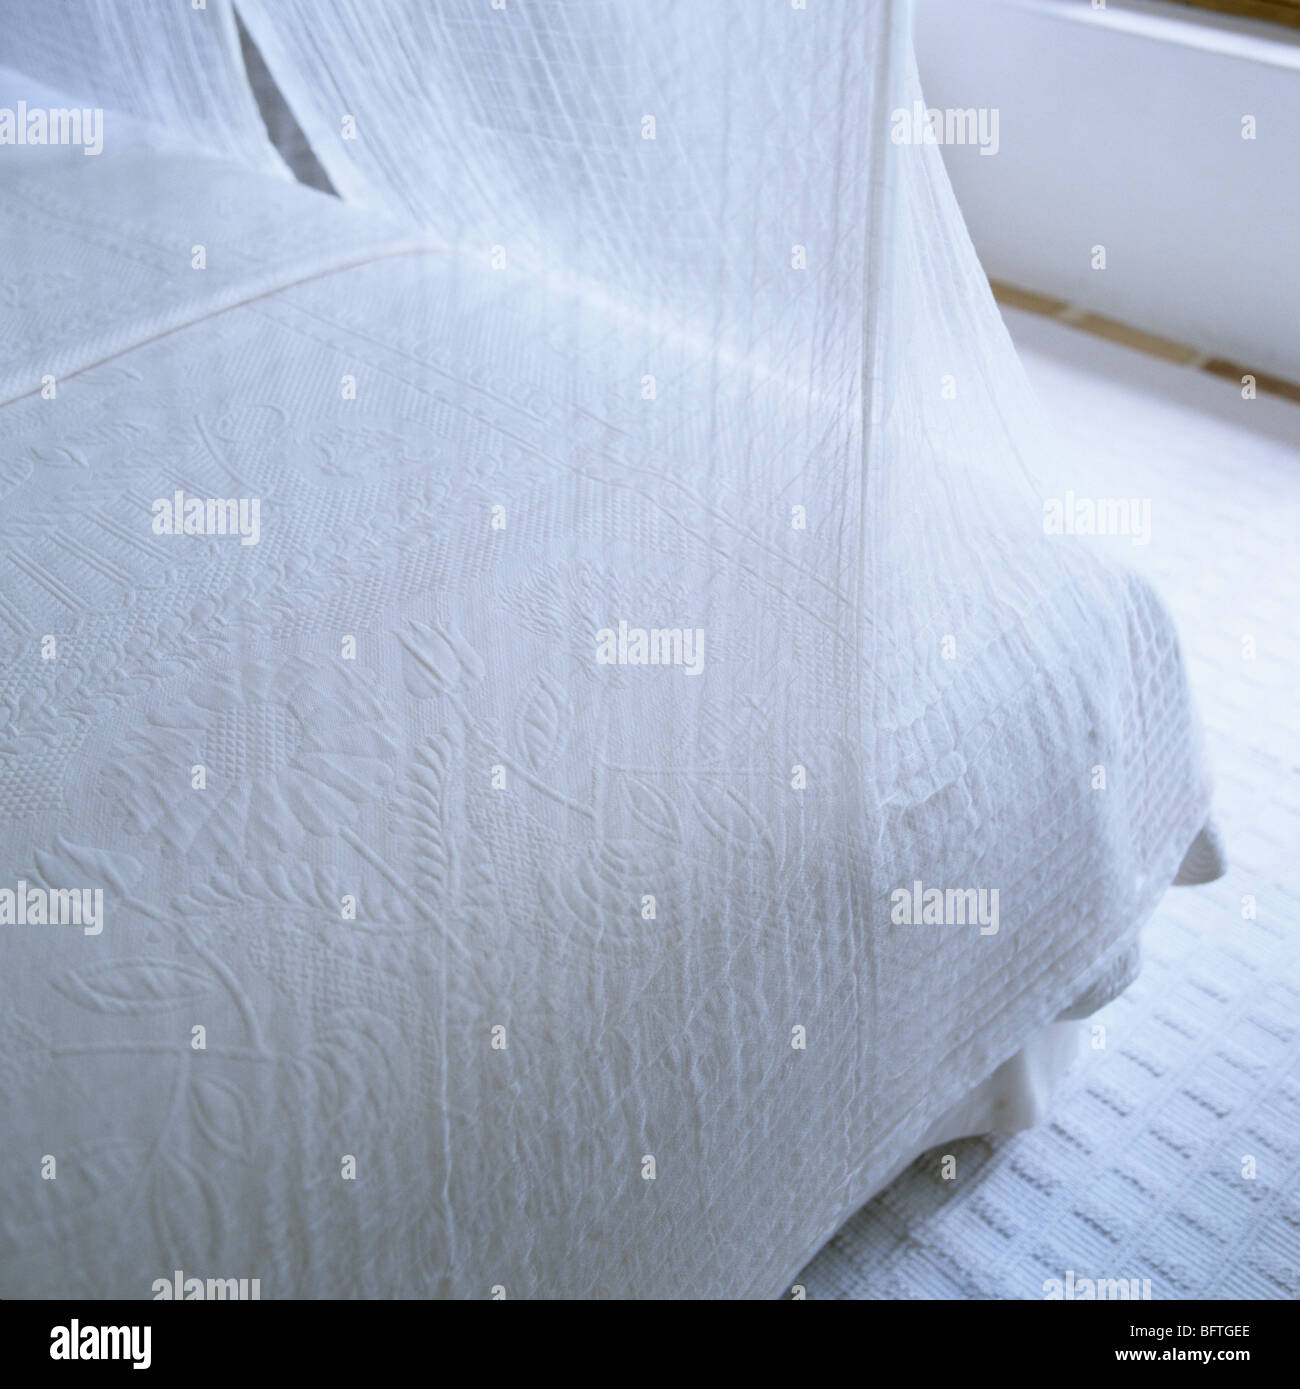 Bed corner with white bedding and muslin net Stock Photo